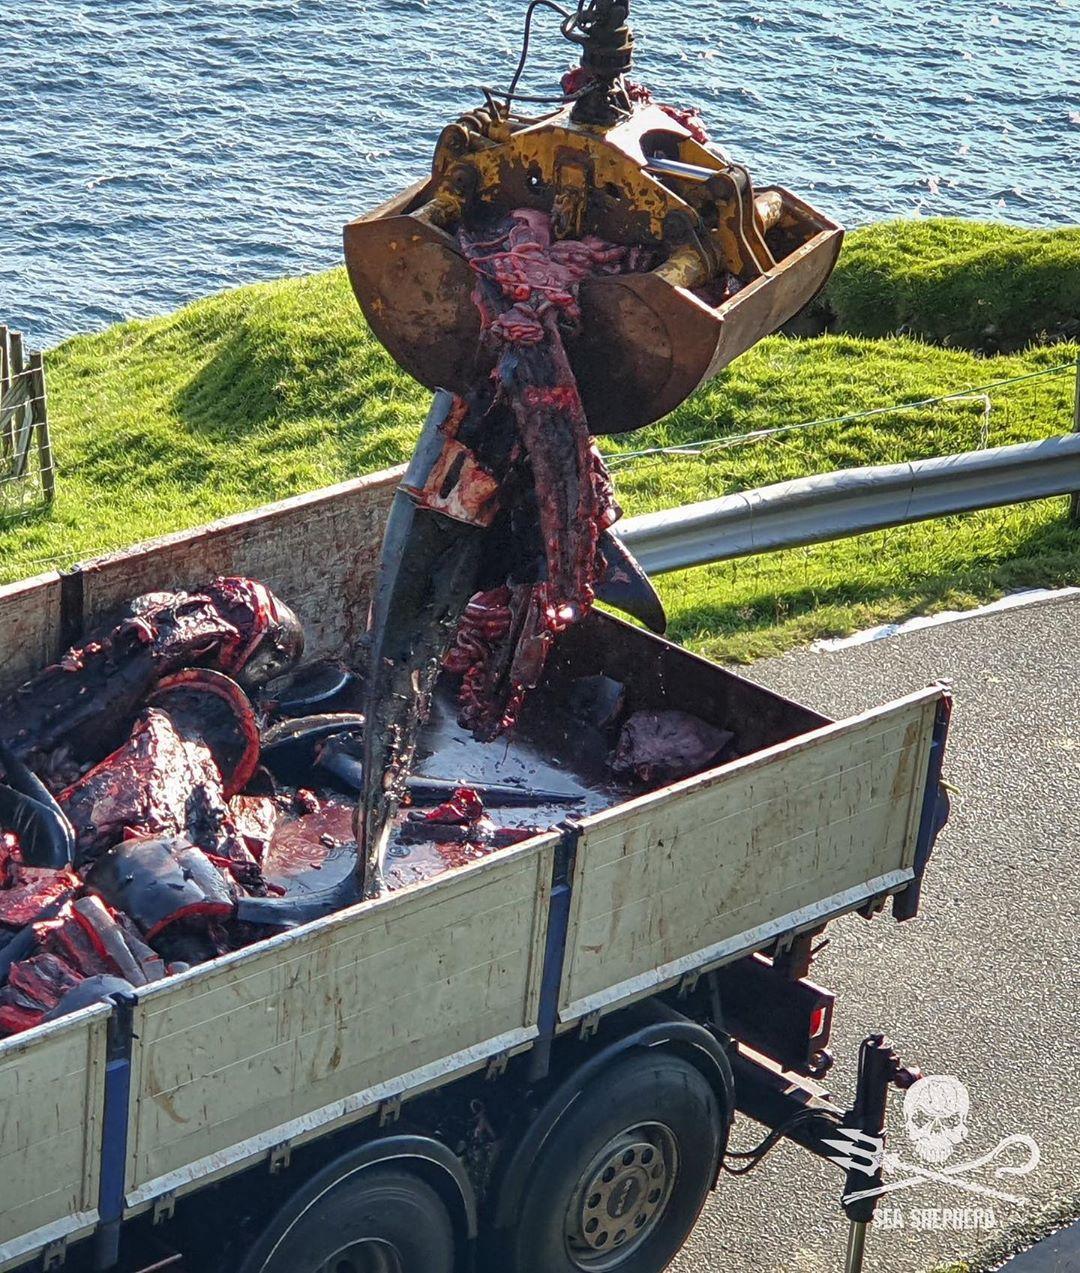 Gruesome pictures show the whales' remains loaded into trucks